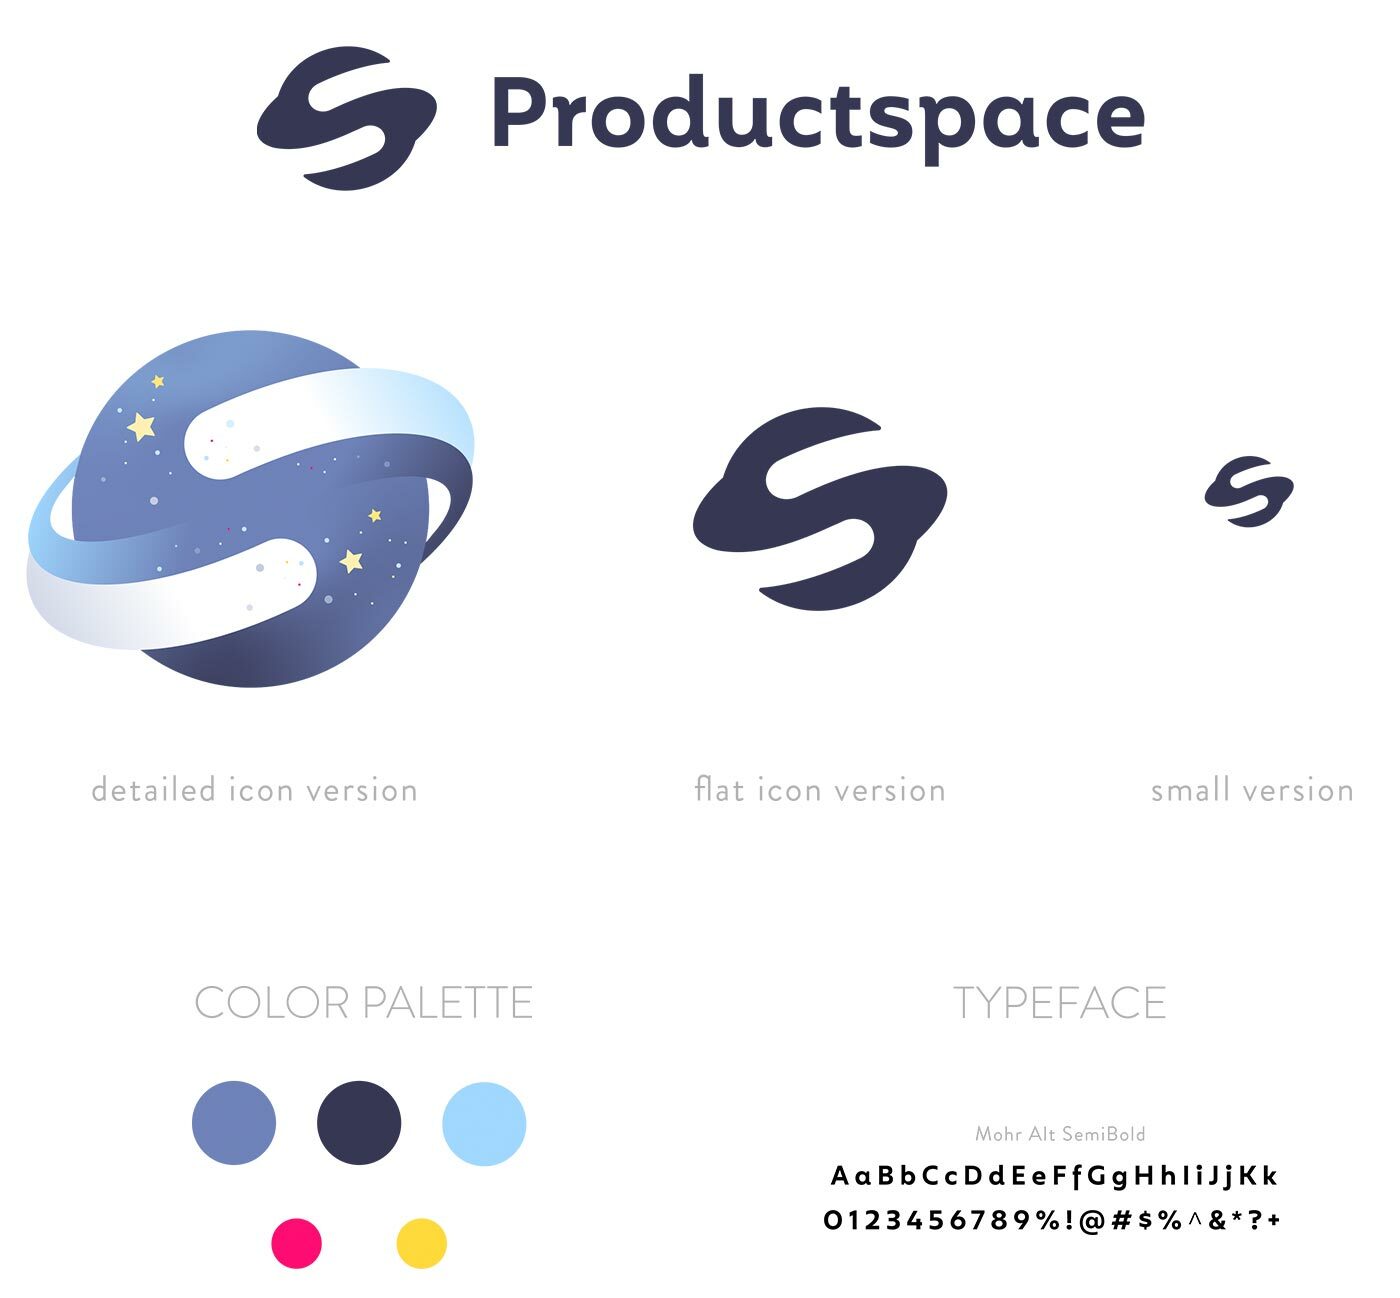 Updated logo design proposal for ProductSpace after client feedback